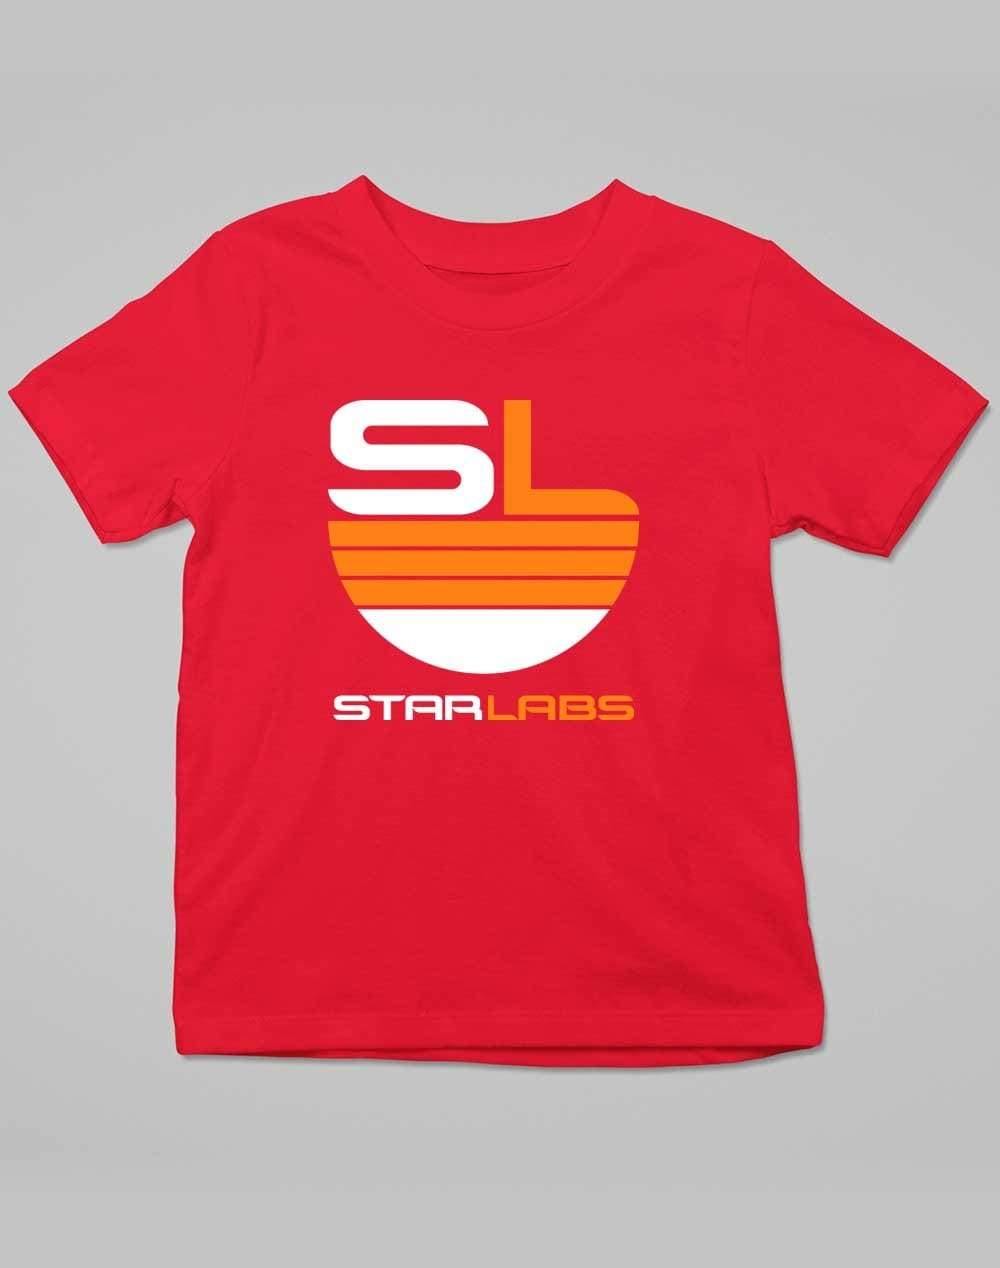 Star Labs Logo Kids T-Shirt 3-4 years / Red  - Off World Tees